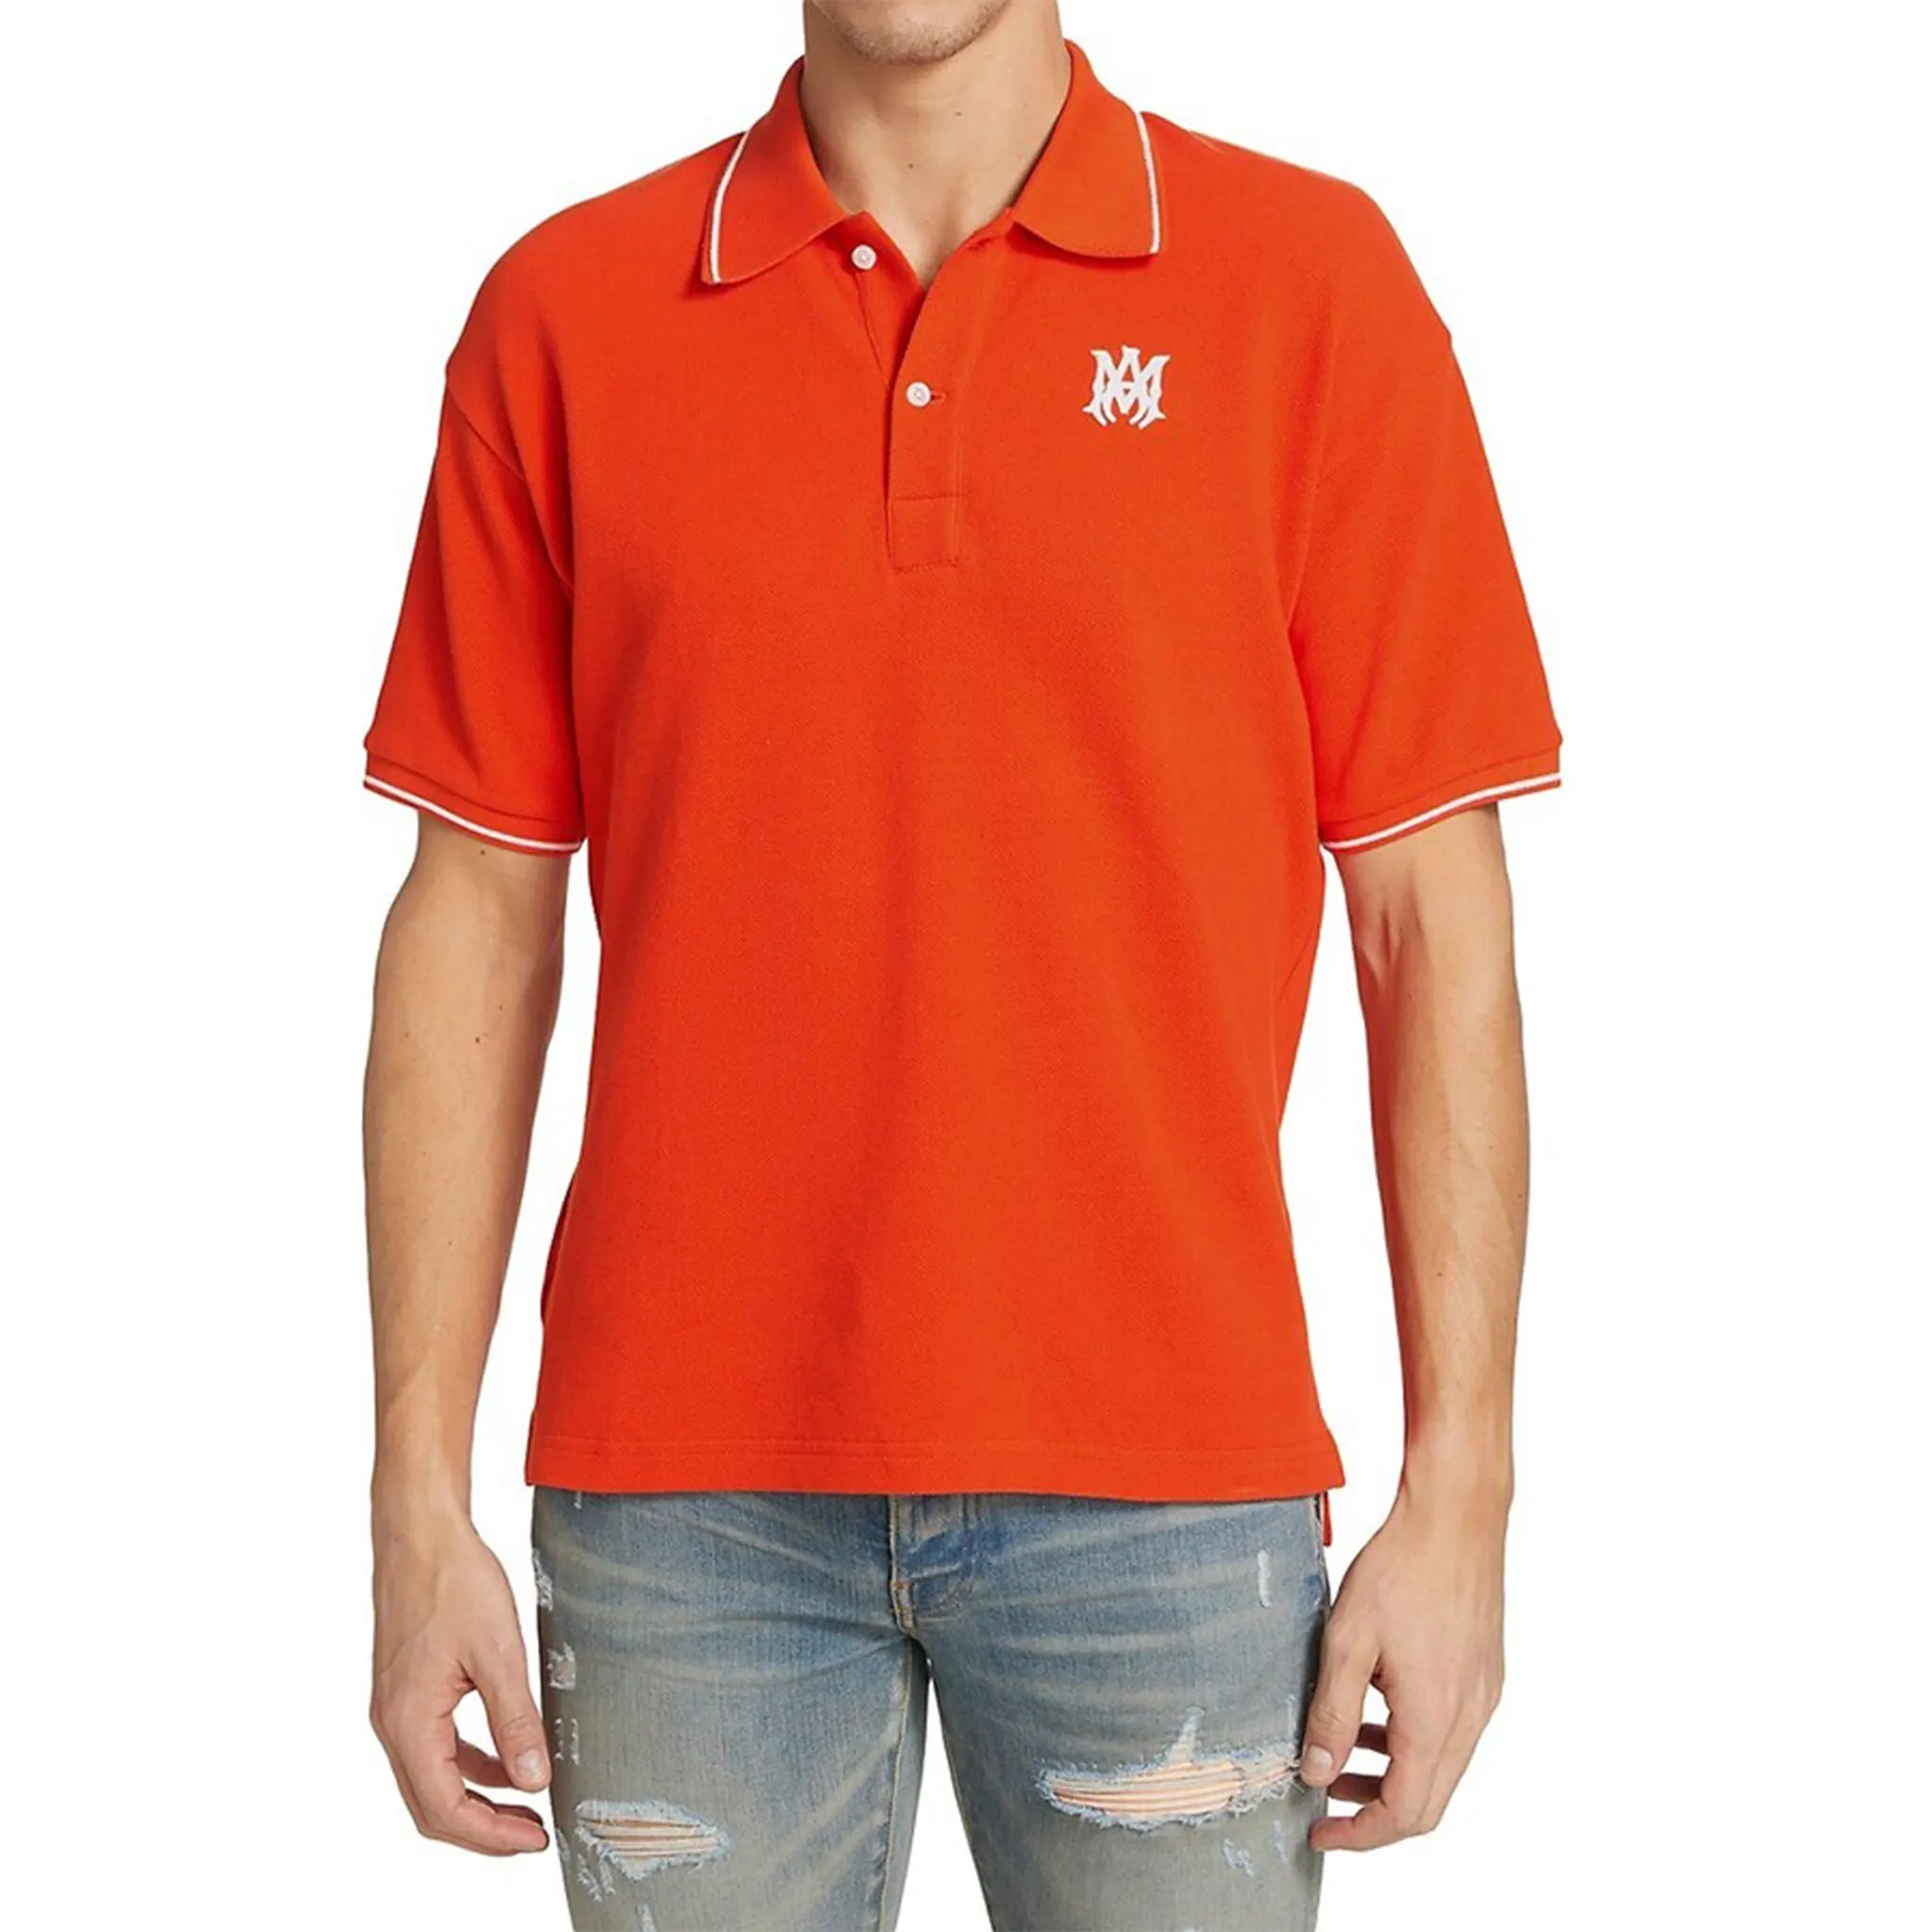 Model Front view of Amiri Solid Short Sleeve Orange Polo Shirt PF22MSS015-665